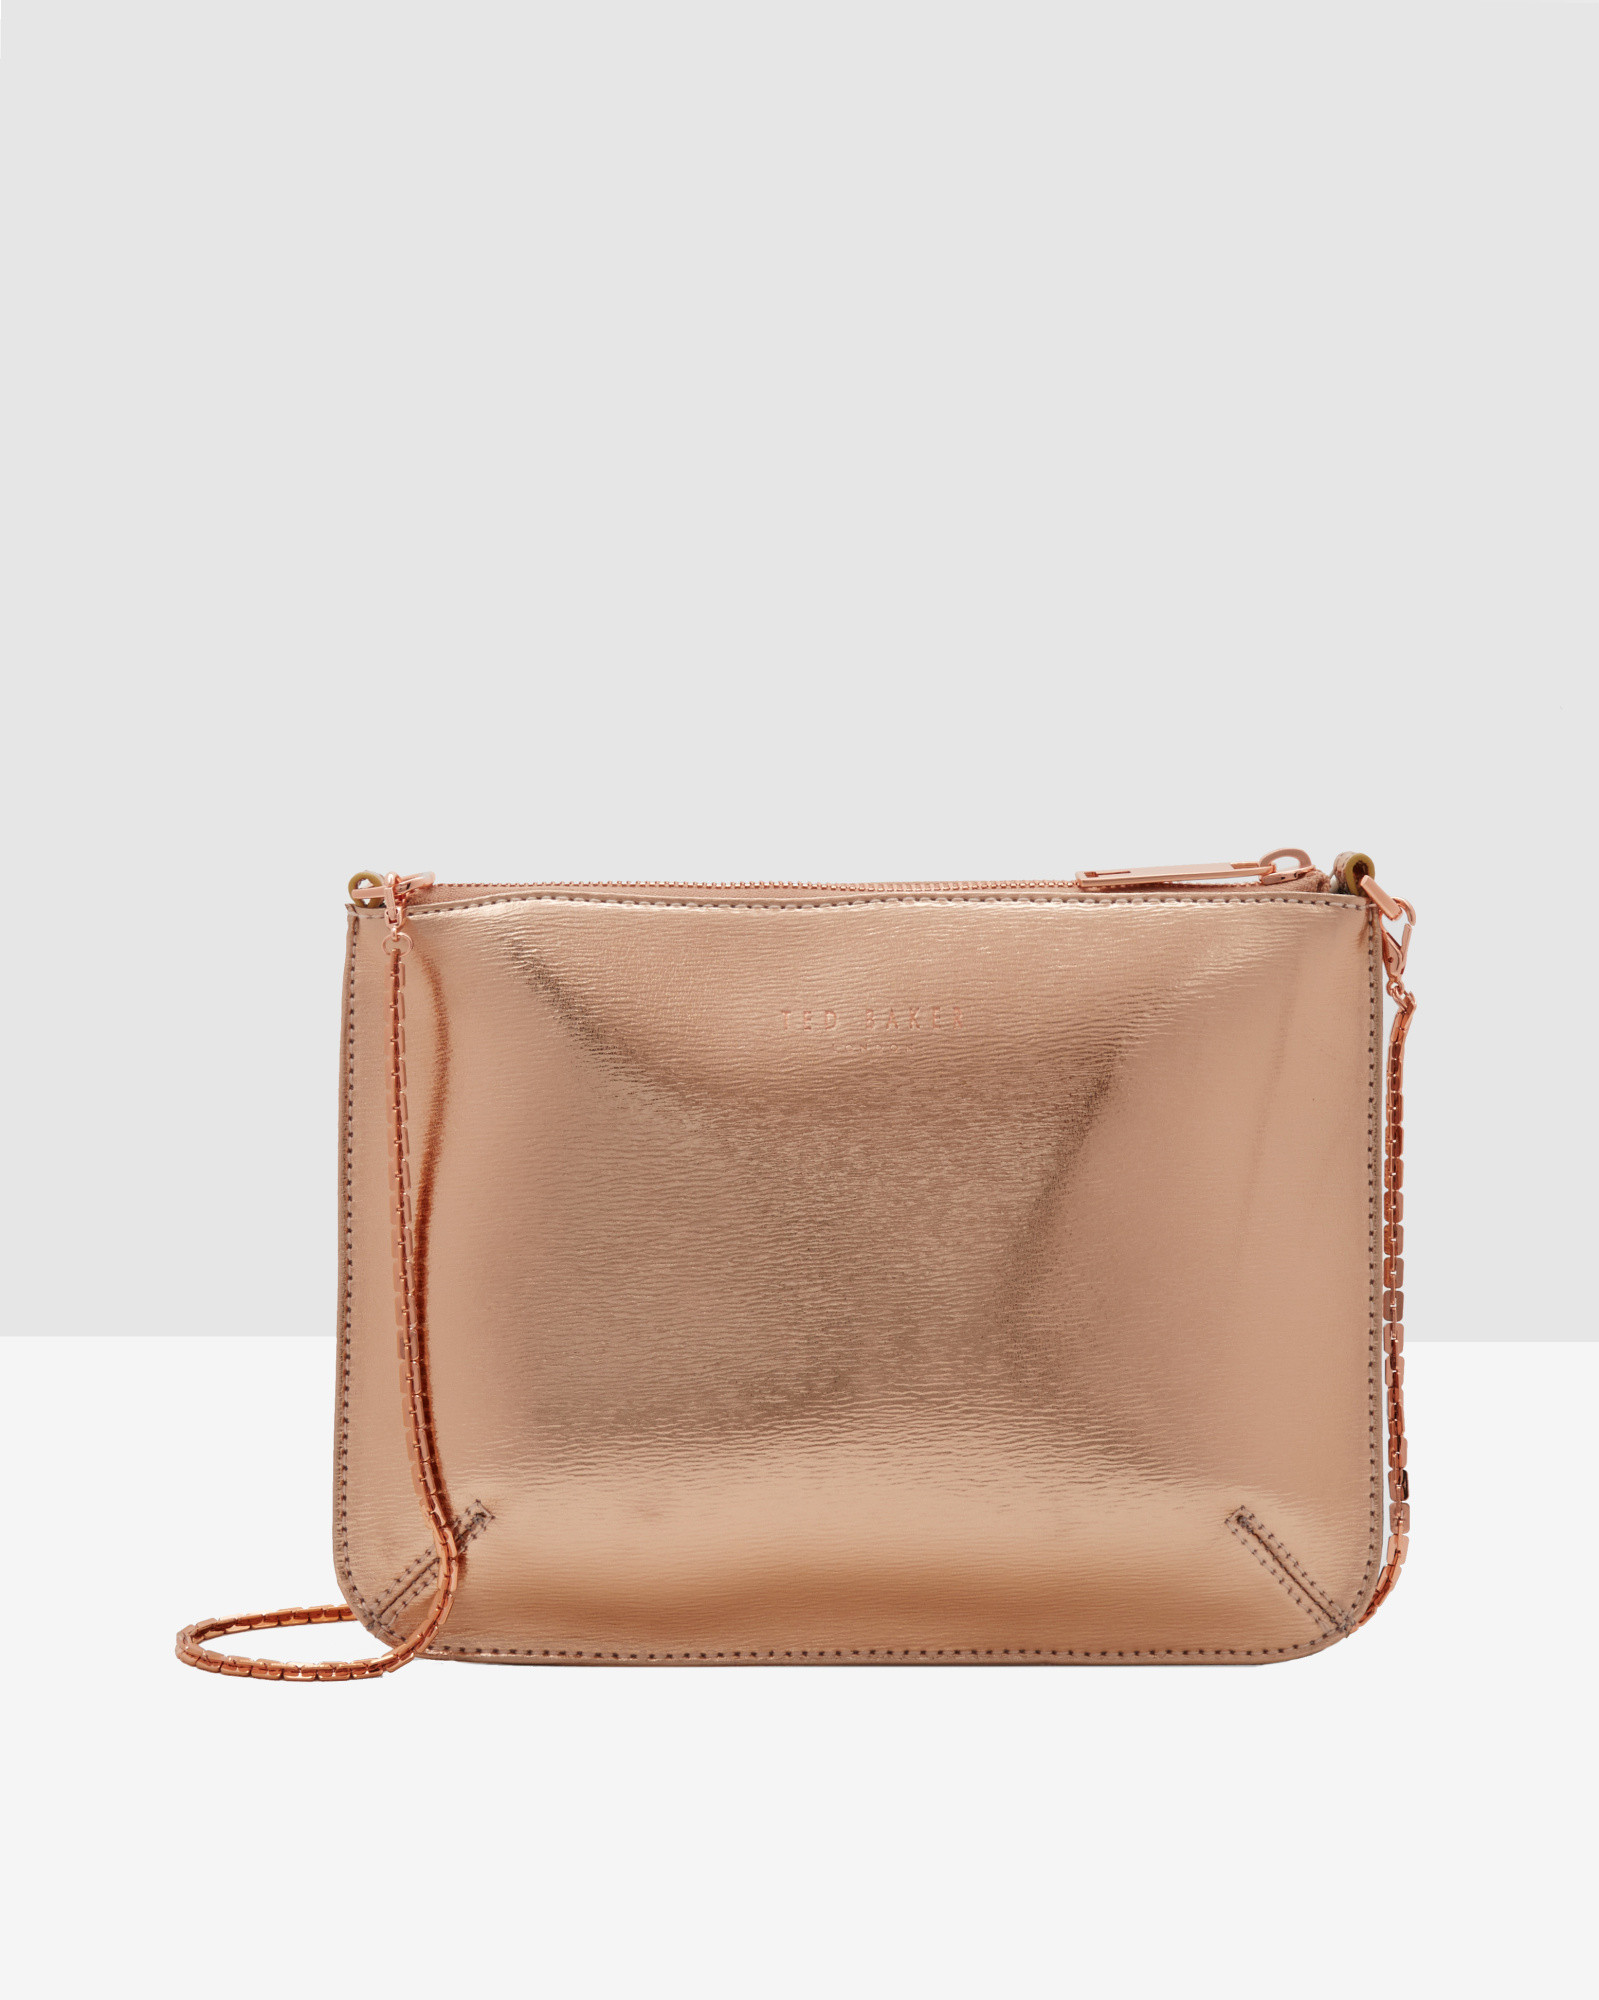 Ted Baker Crosshatch Leather Clutch Bag in Pink - Lyst